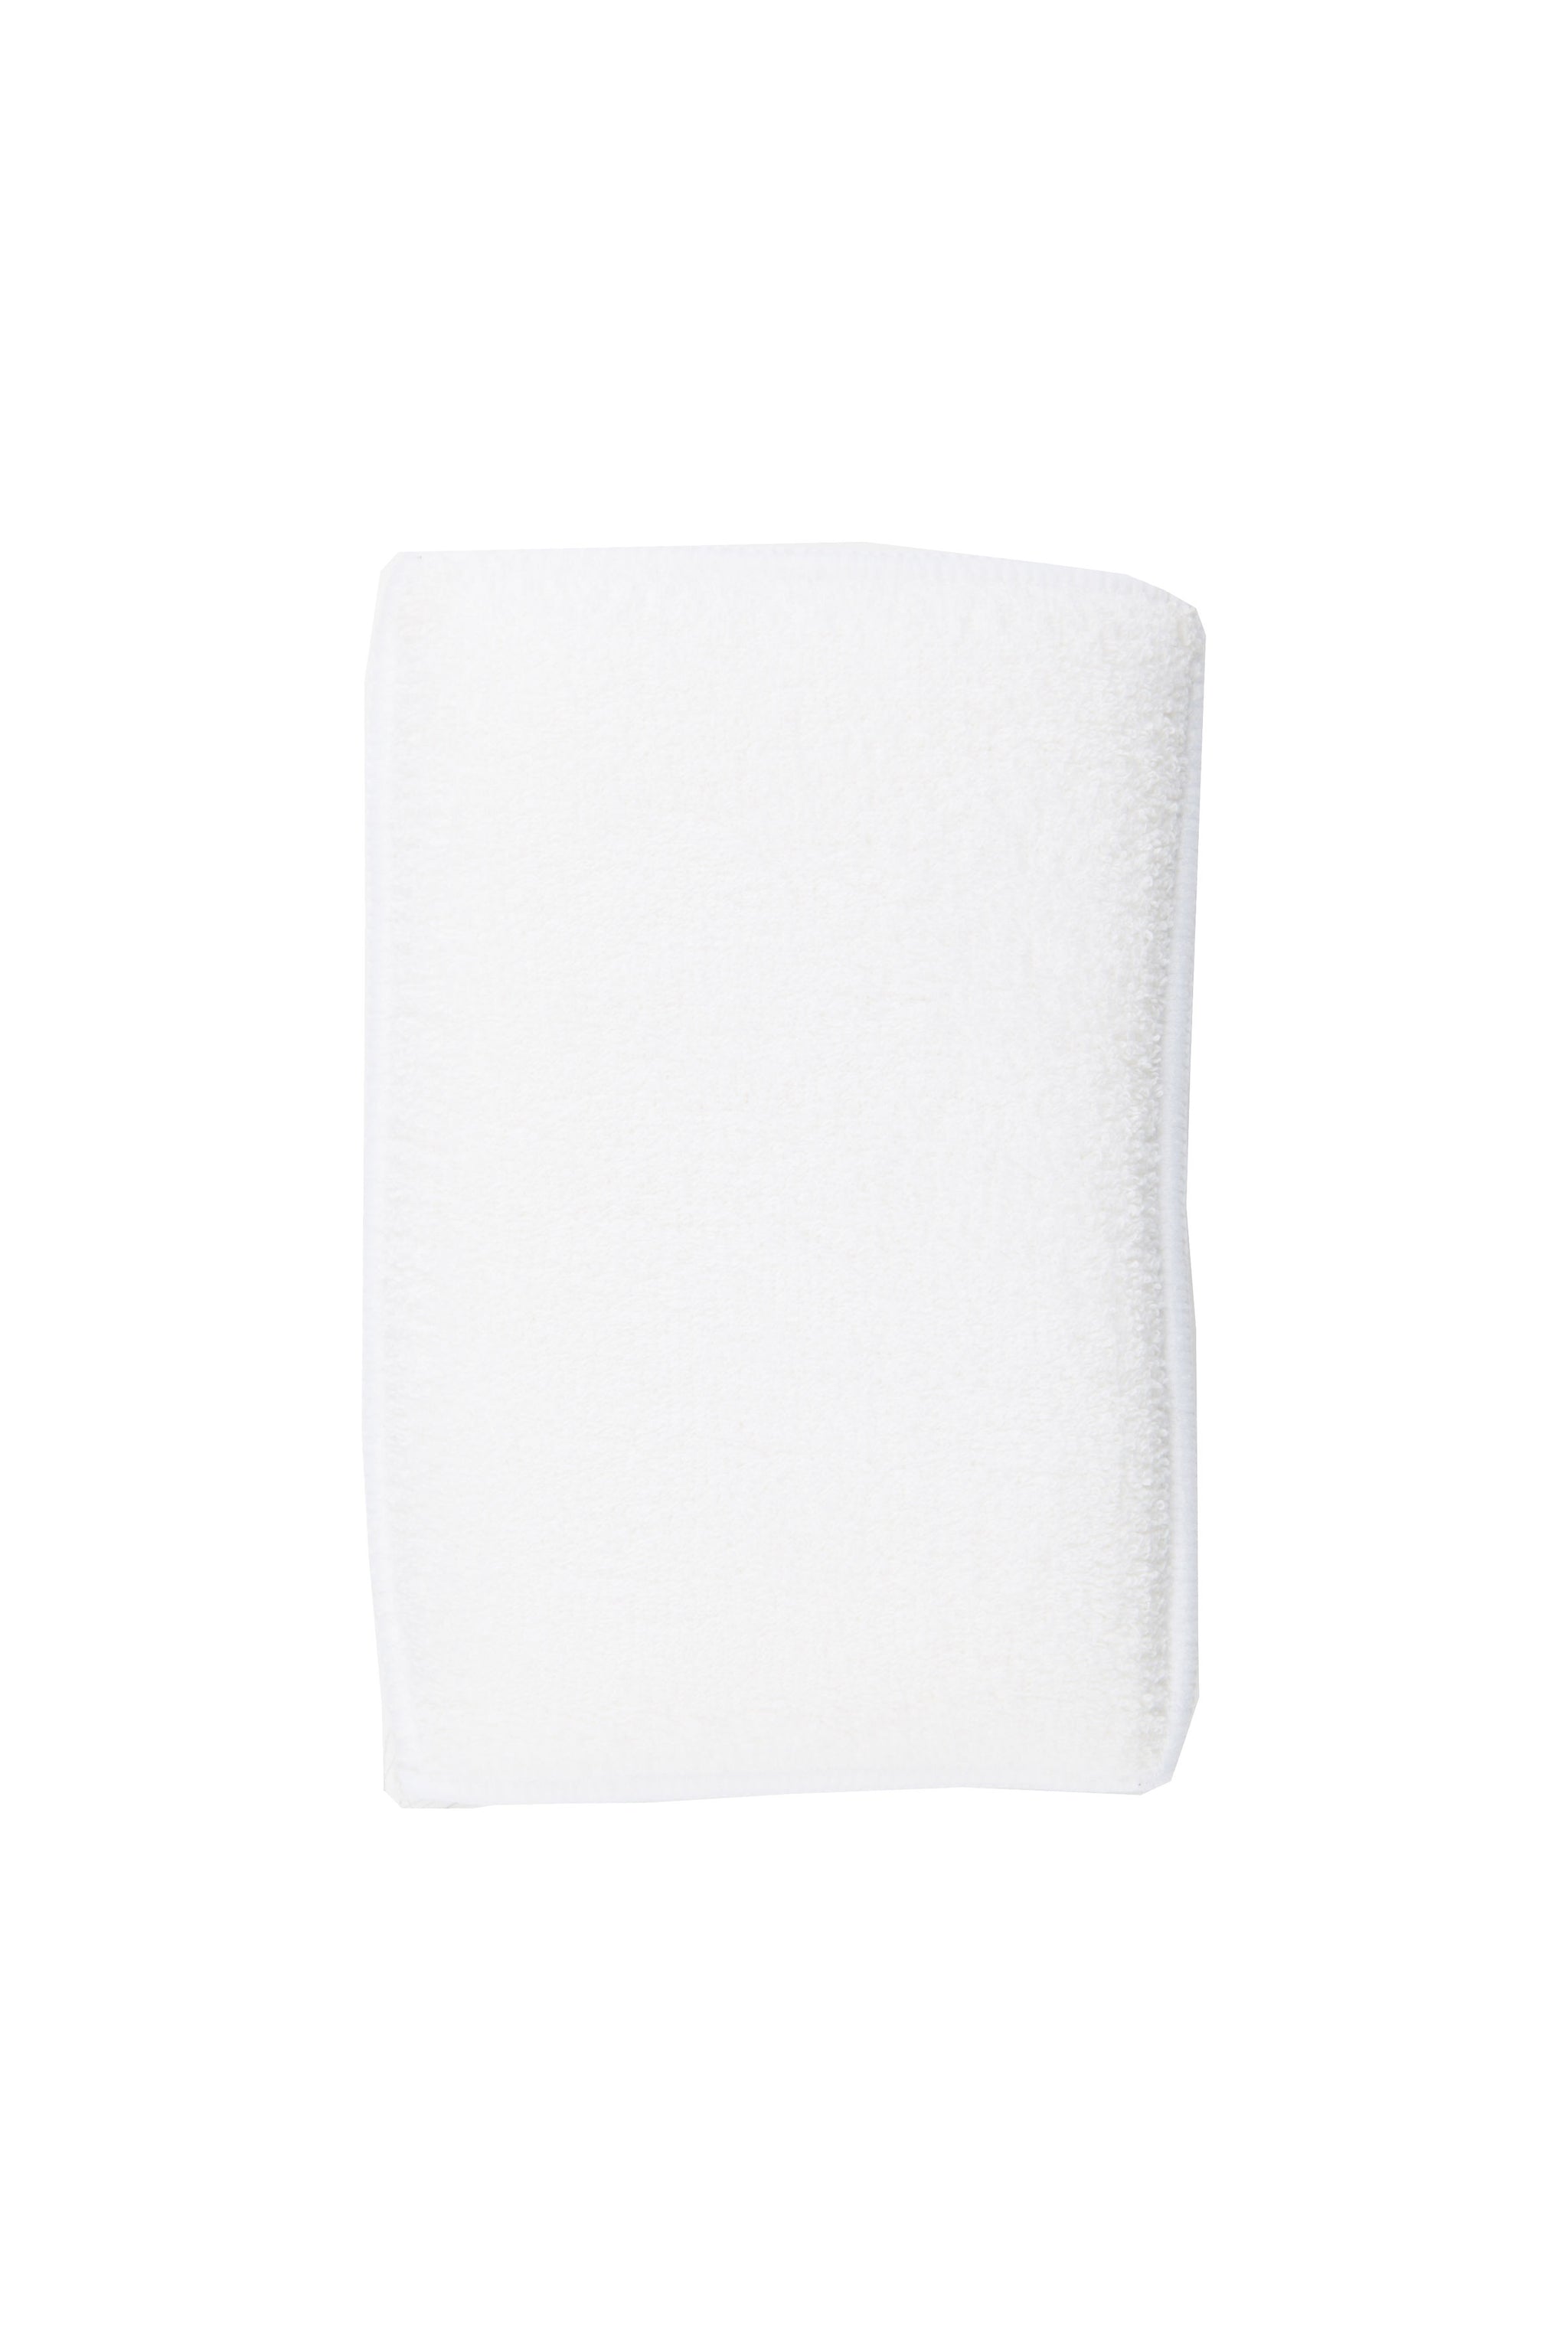 Fusions Applicator Pads 2 pack